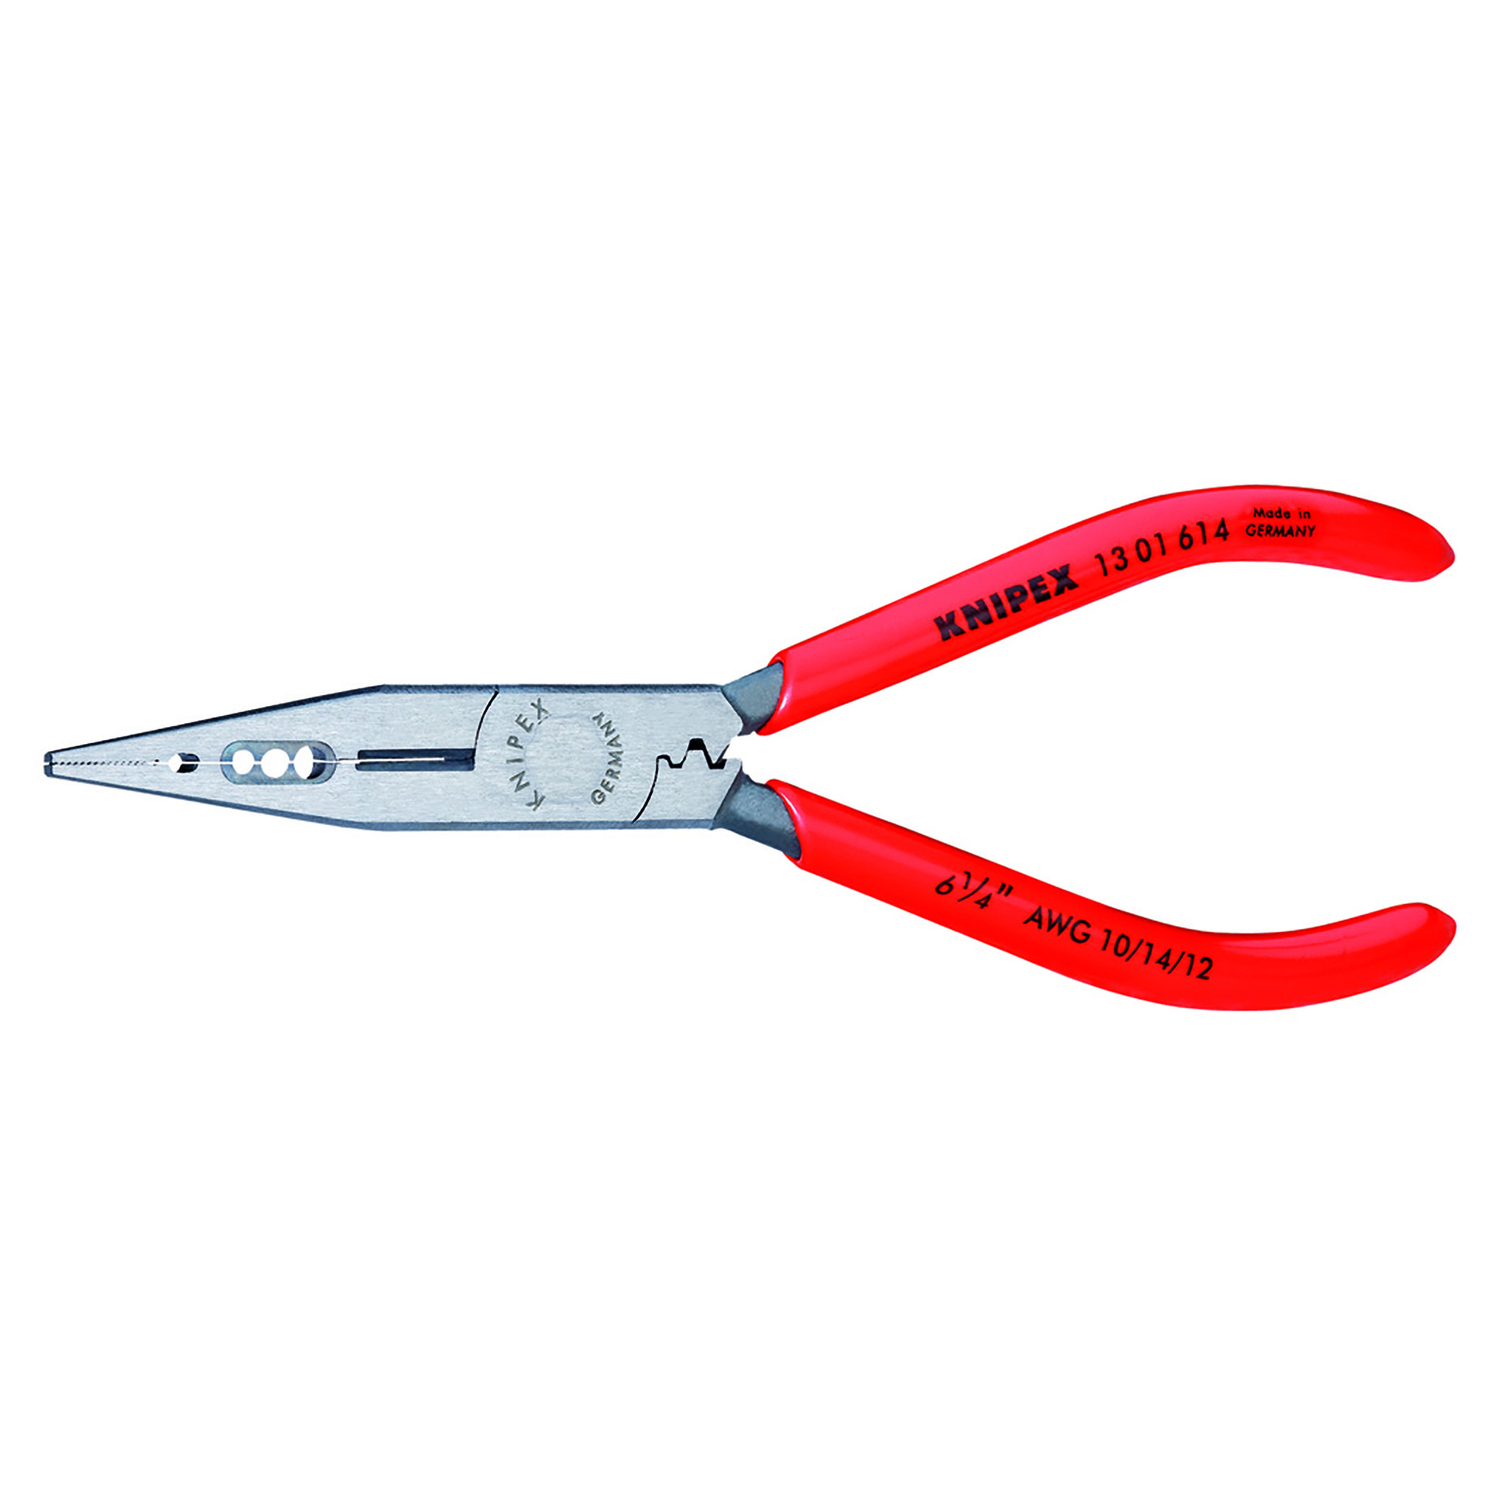 Knipex Cobra XS > 5”/125mm version, and it's not close : r/Tools